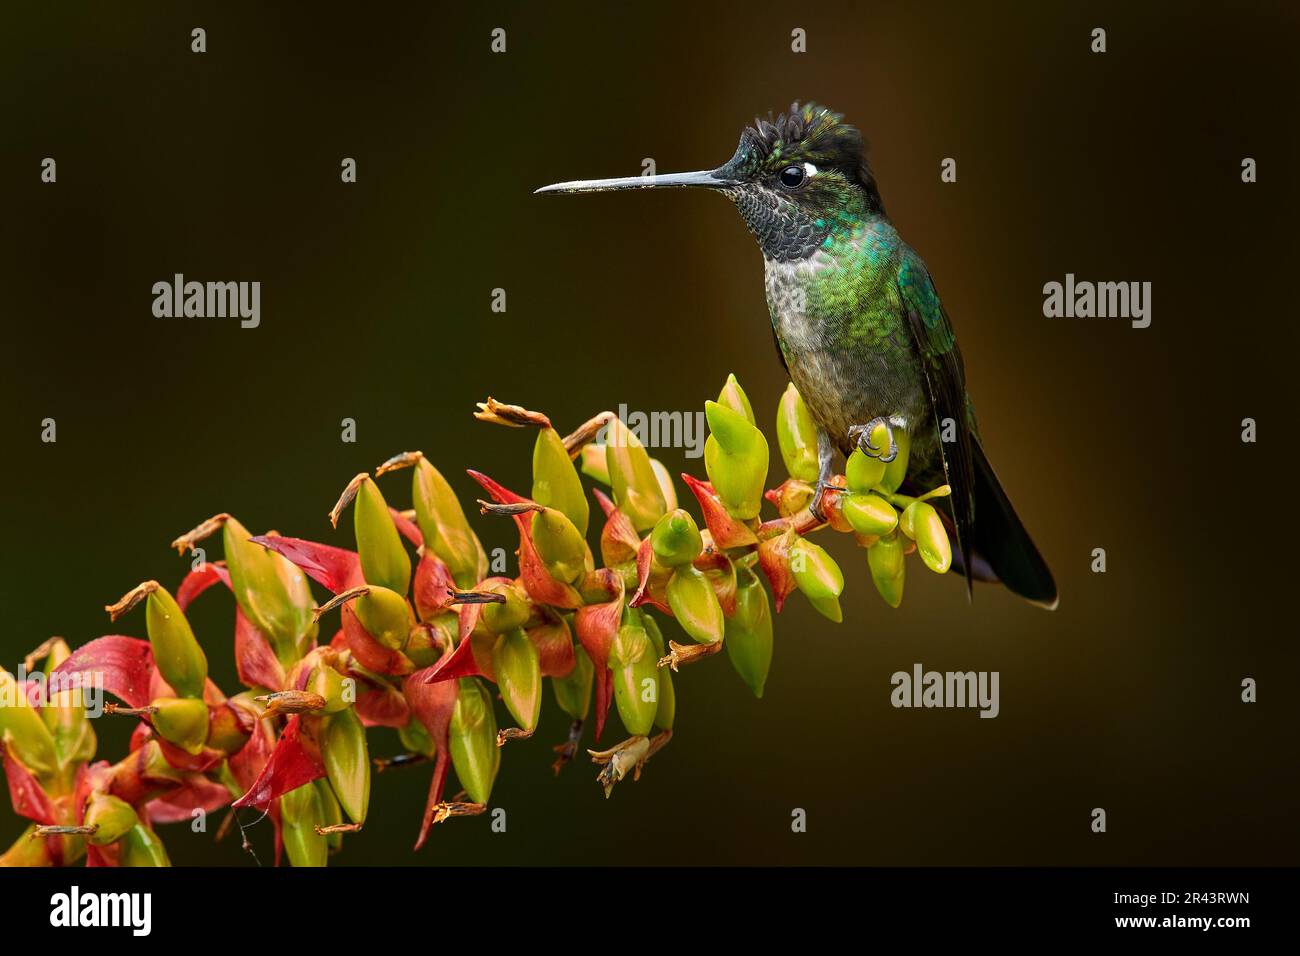 Costa Rica wildlife. Talamanca hummingbird, Eugenes spectabilis, flying next to beautiful orange flower with green forest in the background, Savegre m Stock Photo